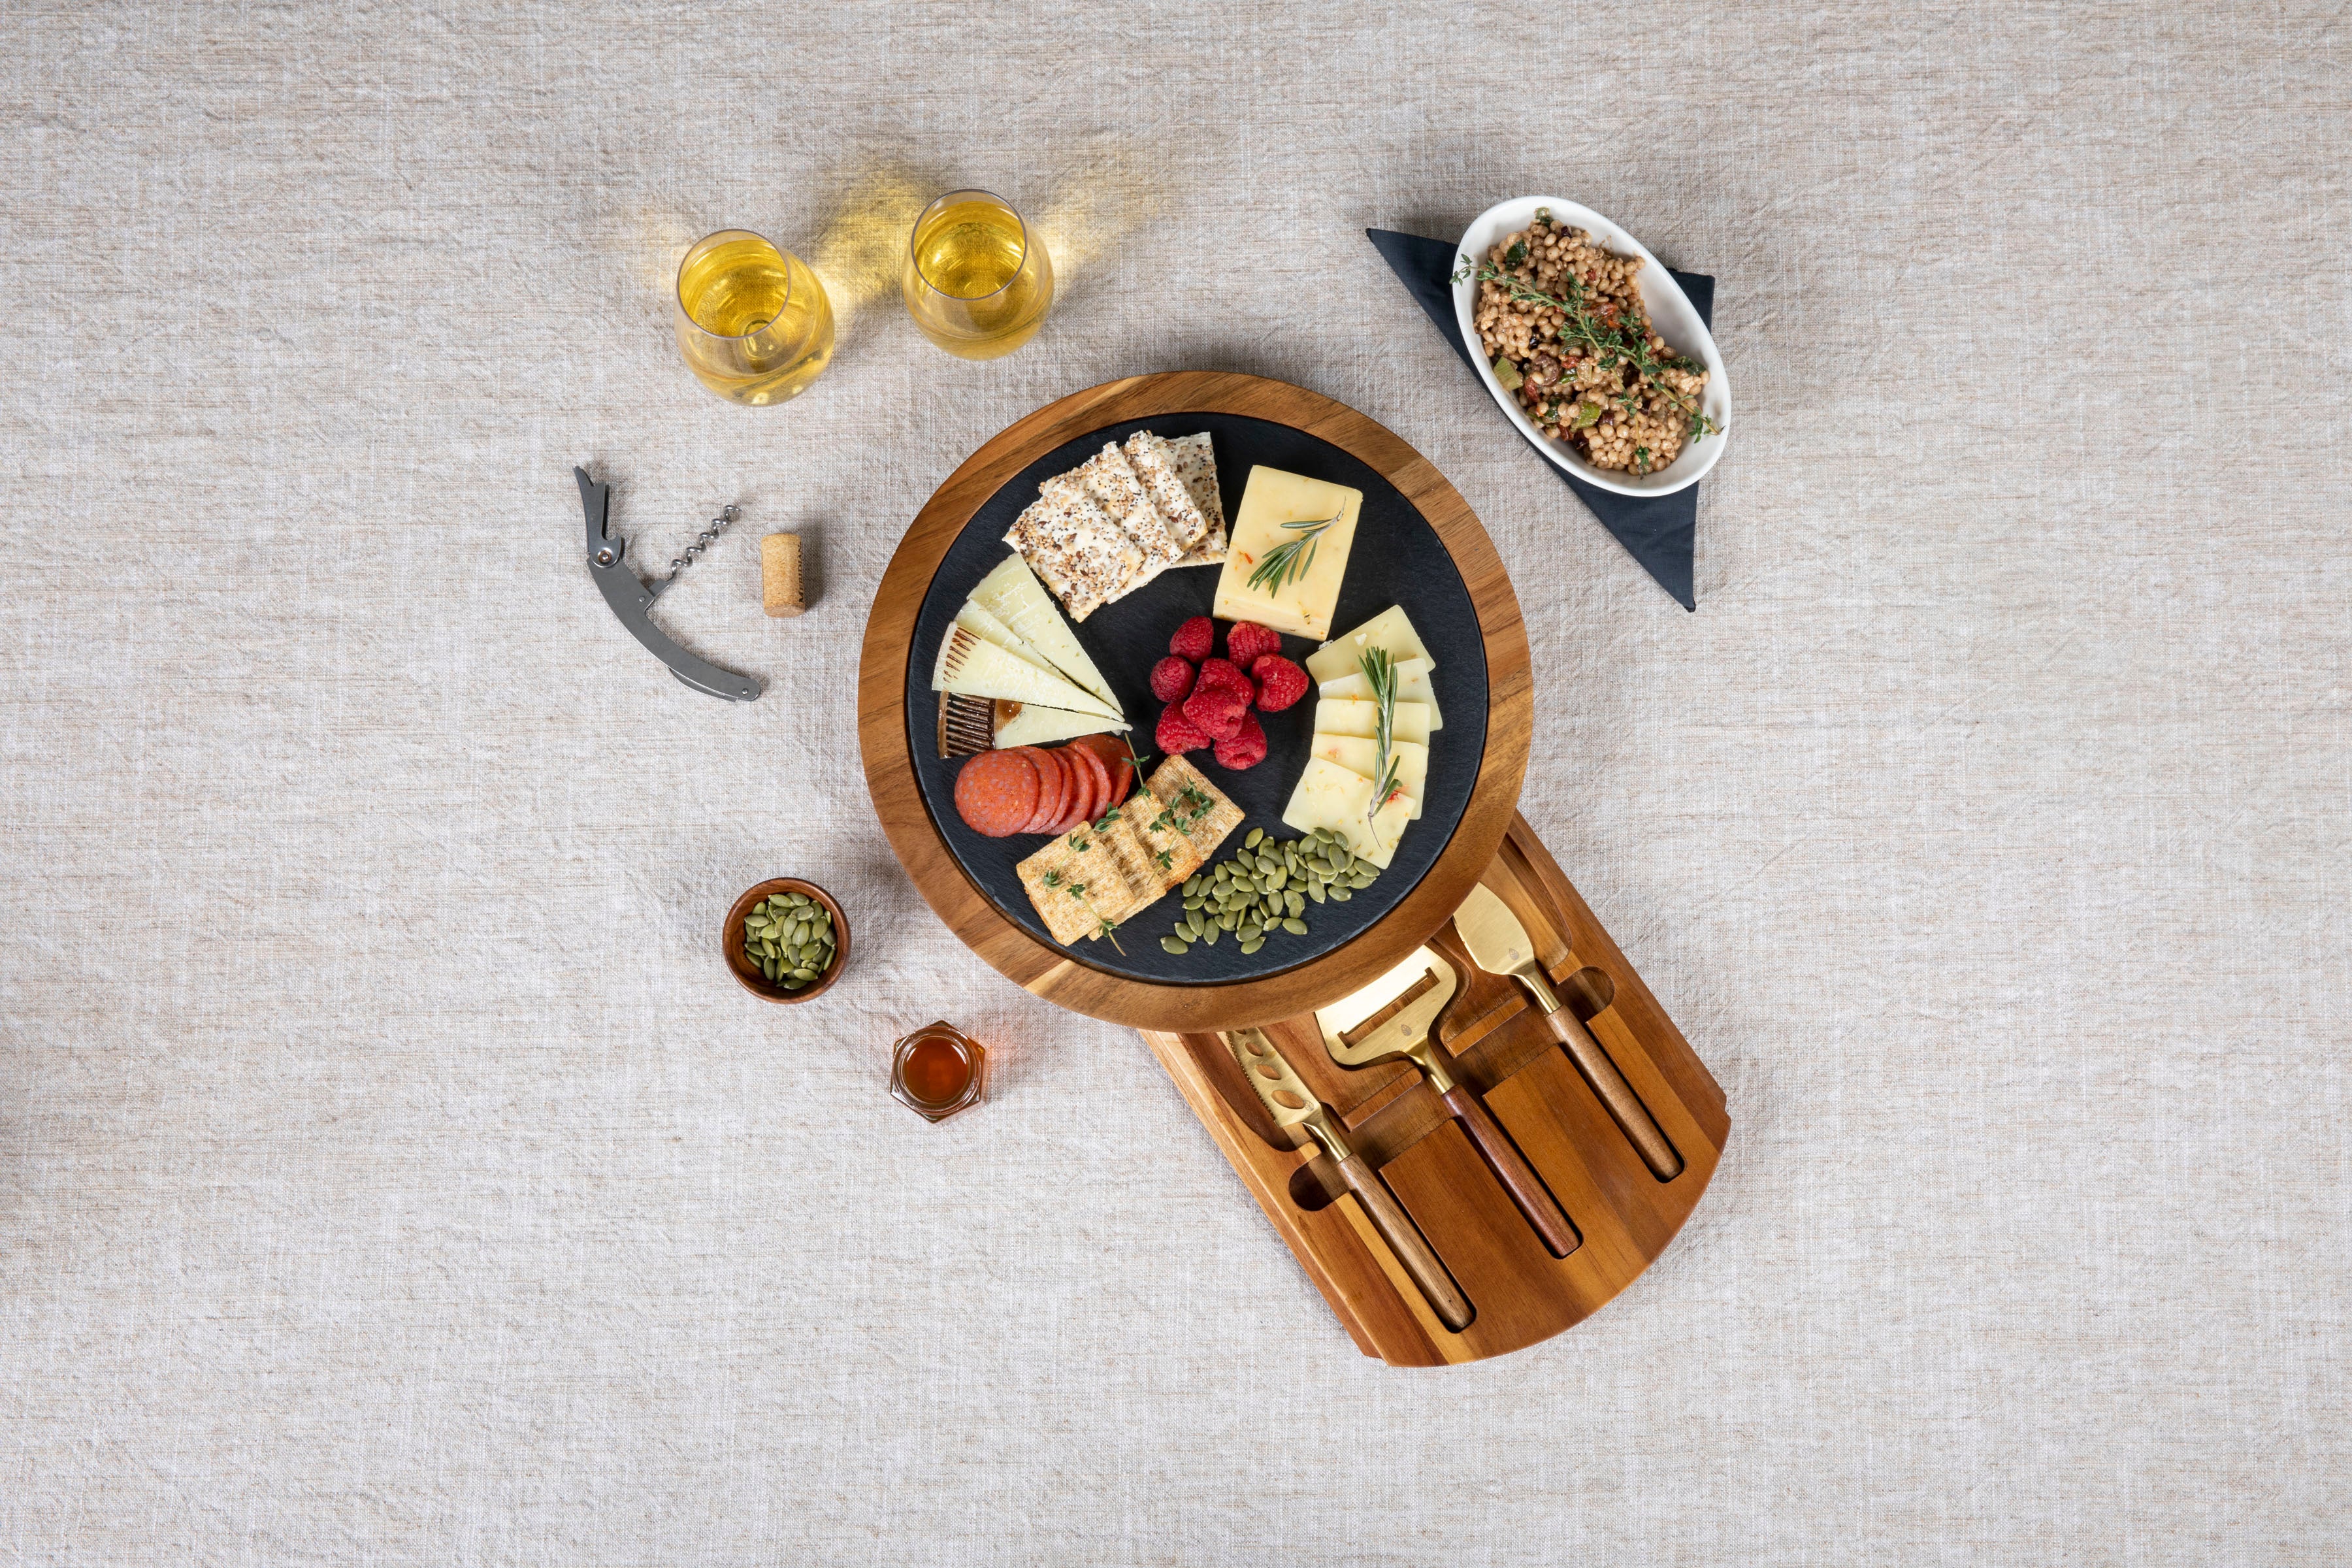 Star Wars Death Star - Insignia Acacia and Slate Serving Board with Cheese Tools